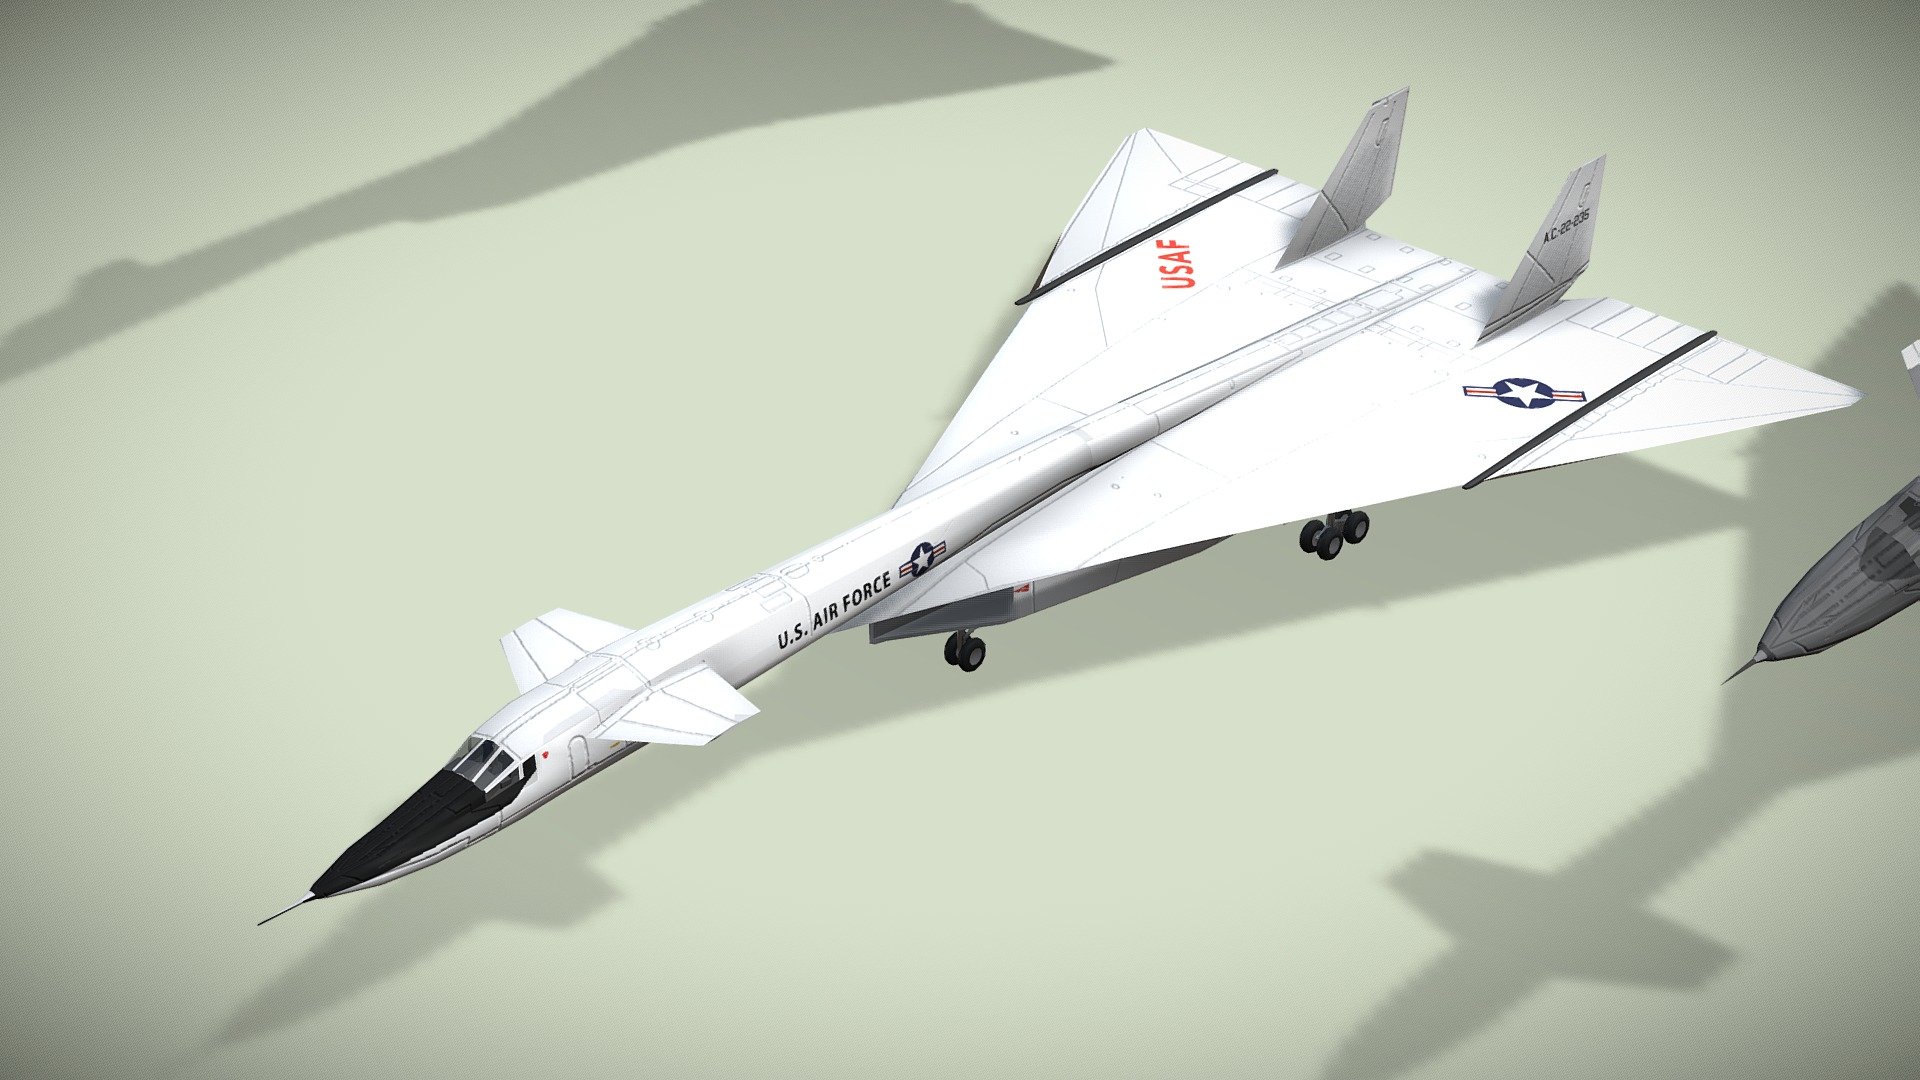 North American XB-70 Valkyrie

Lowpoly model of american strategic bomber.



North American Aviation XB-70 Valkyrie was the prototype version of the planned B-70 nuclear-armed, deep-penetration supersonic strategic bomber for the United States Air Force Strategic Air Command. Designed in the late 1950s six-engined Valkyrie was capable of cruising for thousands of miles at Mach 3+.

At these speeds, it was expected that the B-70 would be practically immune to interceptor aircraft, the only effective weapon against bomber aircraft at the time. The bomber would spend only a brief time over a particular radar station, flying out of its range before the controllers could position their fighters in a suitable location for an interception. 



1 standing version and 2 flying versions in set.

Model has bump map, roughness map and 3 x diffuse textures.



Check also my other aircrafts and cars.

Patreon with monthly free model - North American XB-70 Valkyrie - Buy Royalty Free 3D model by NETRUNNER_pl 3d model